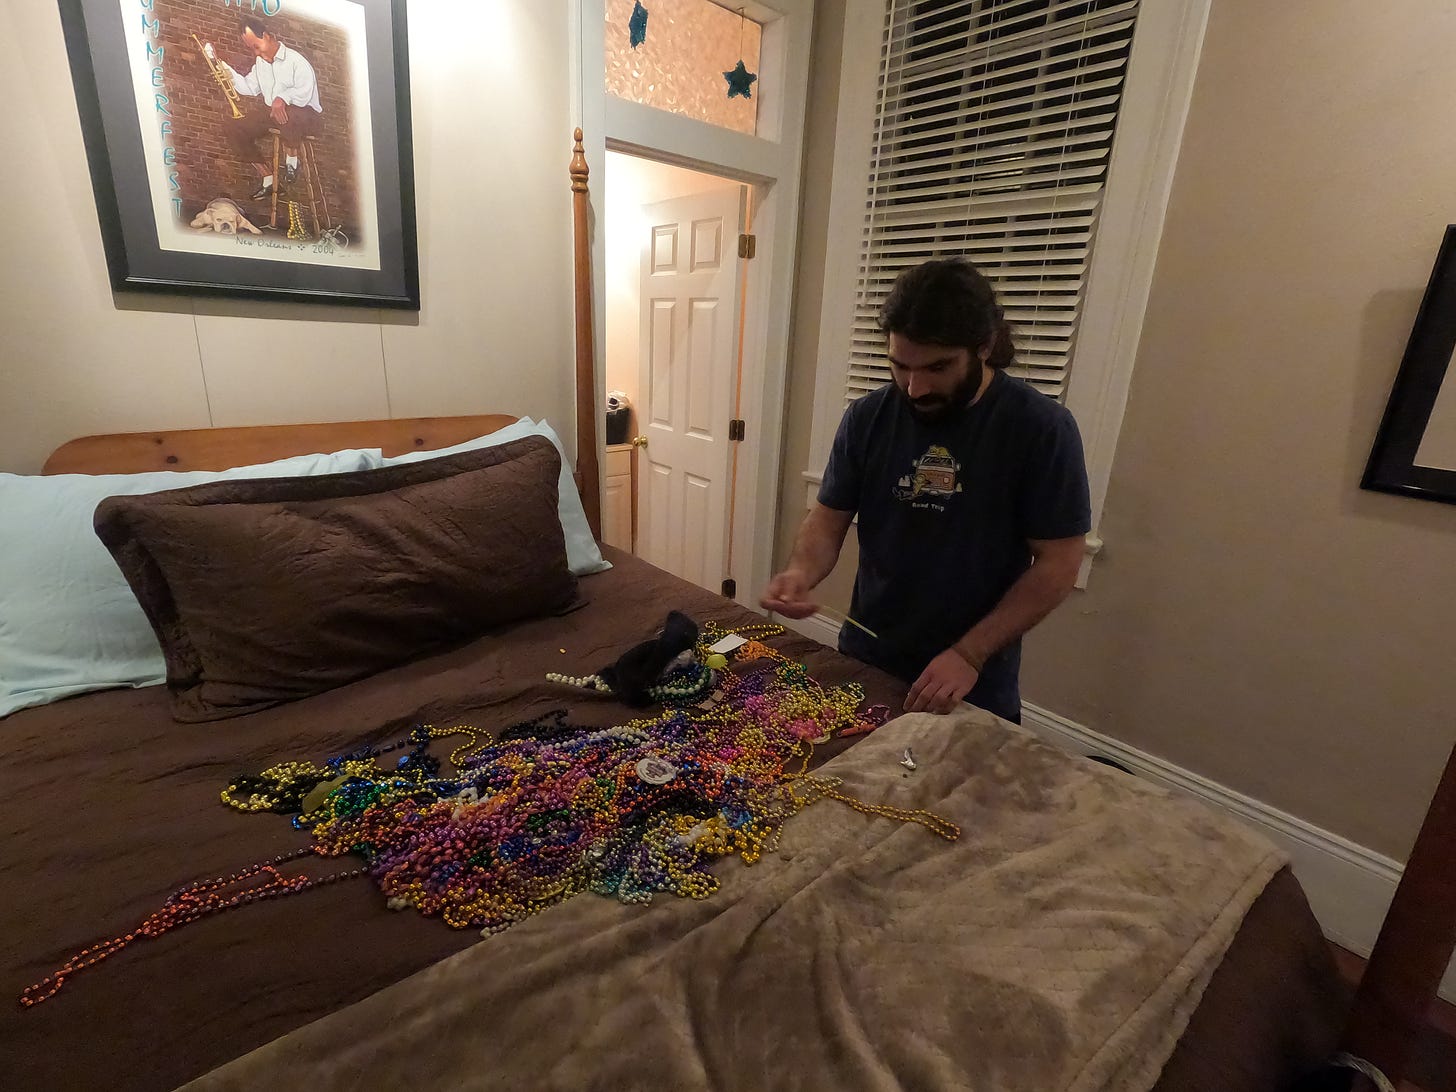 anthony looks down at the bed covered in hundred of colorful beads